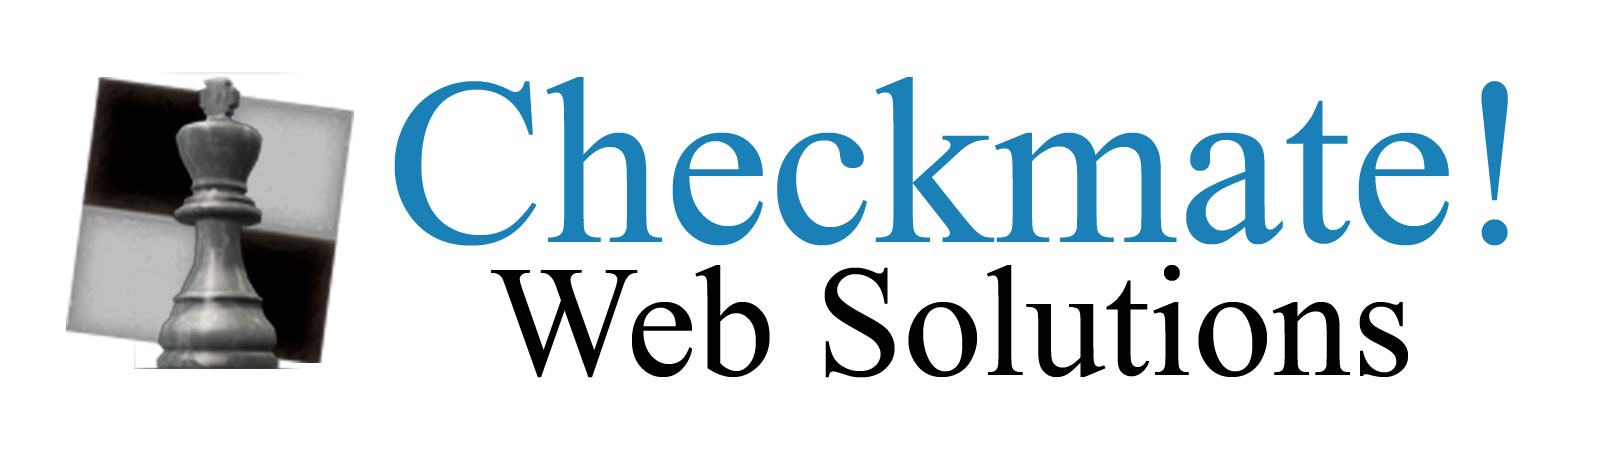 Checkmate Web Solutions